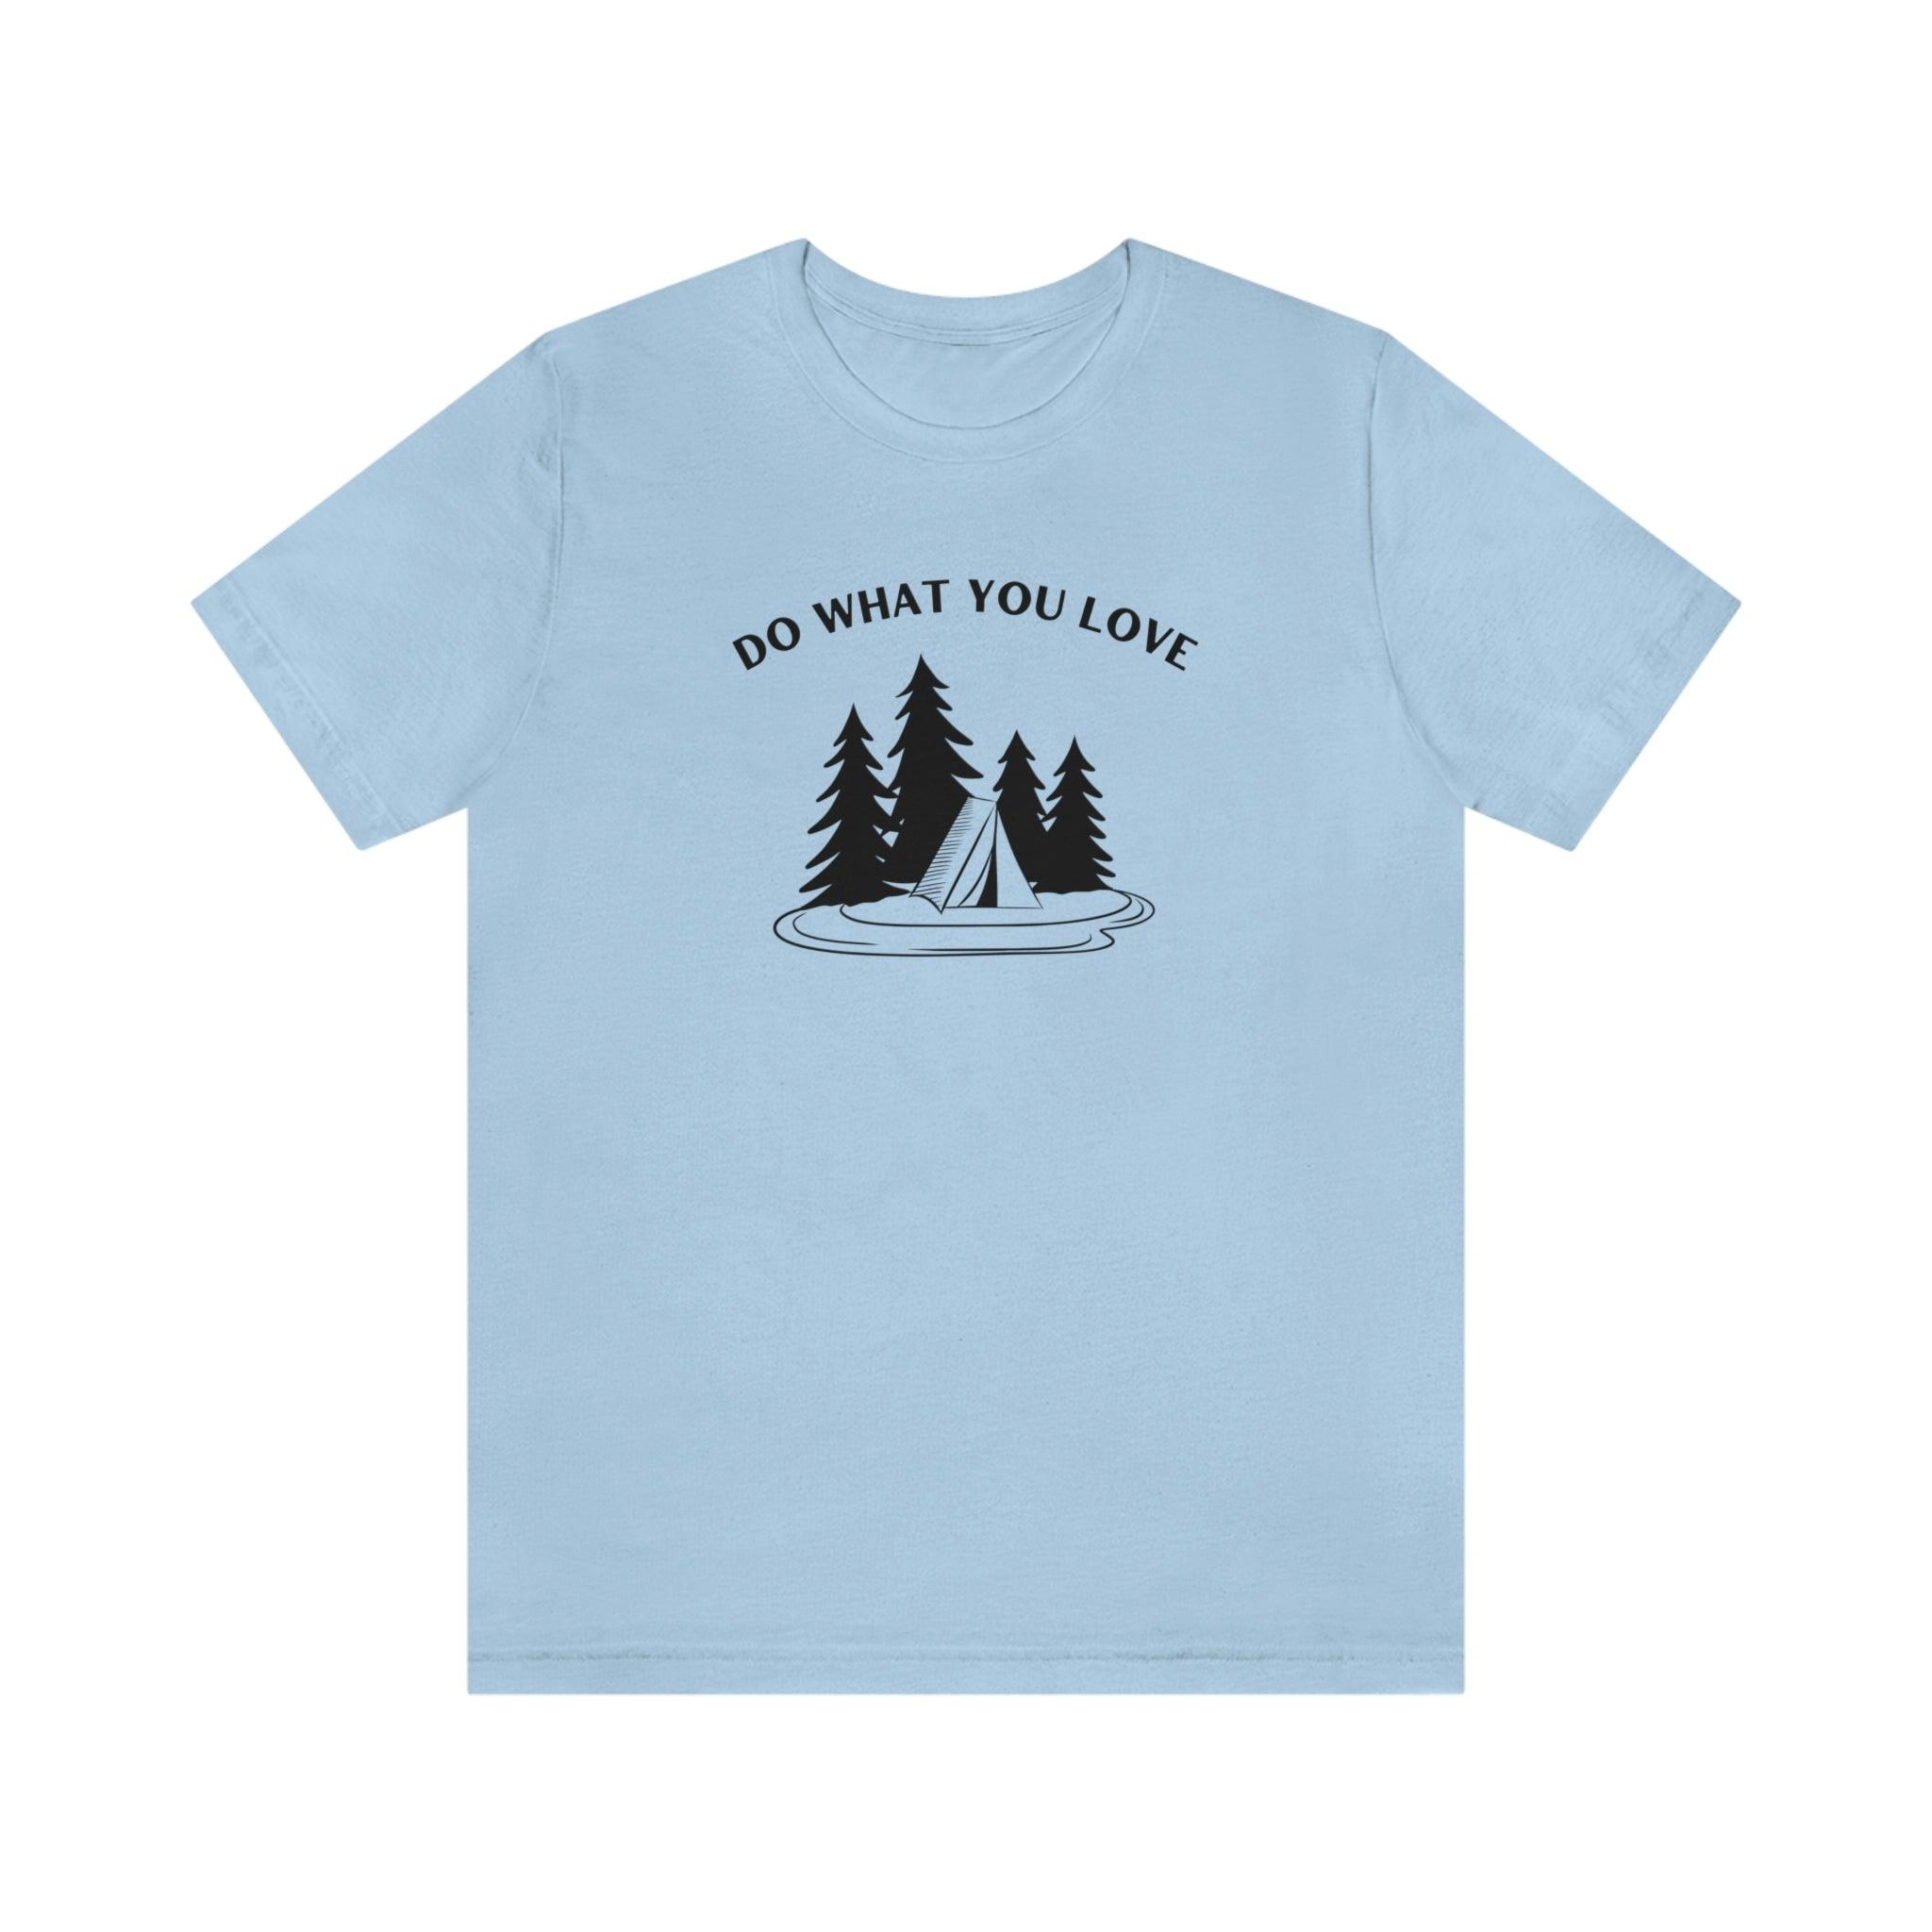 "Do What You Love" Camping 100% Cotton Jersey Short Sleeve T-Shirt - Melomys